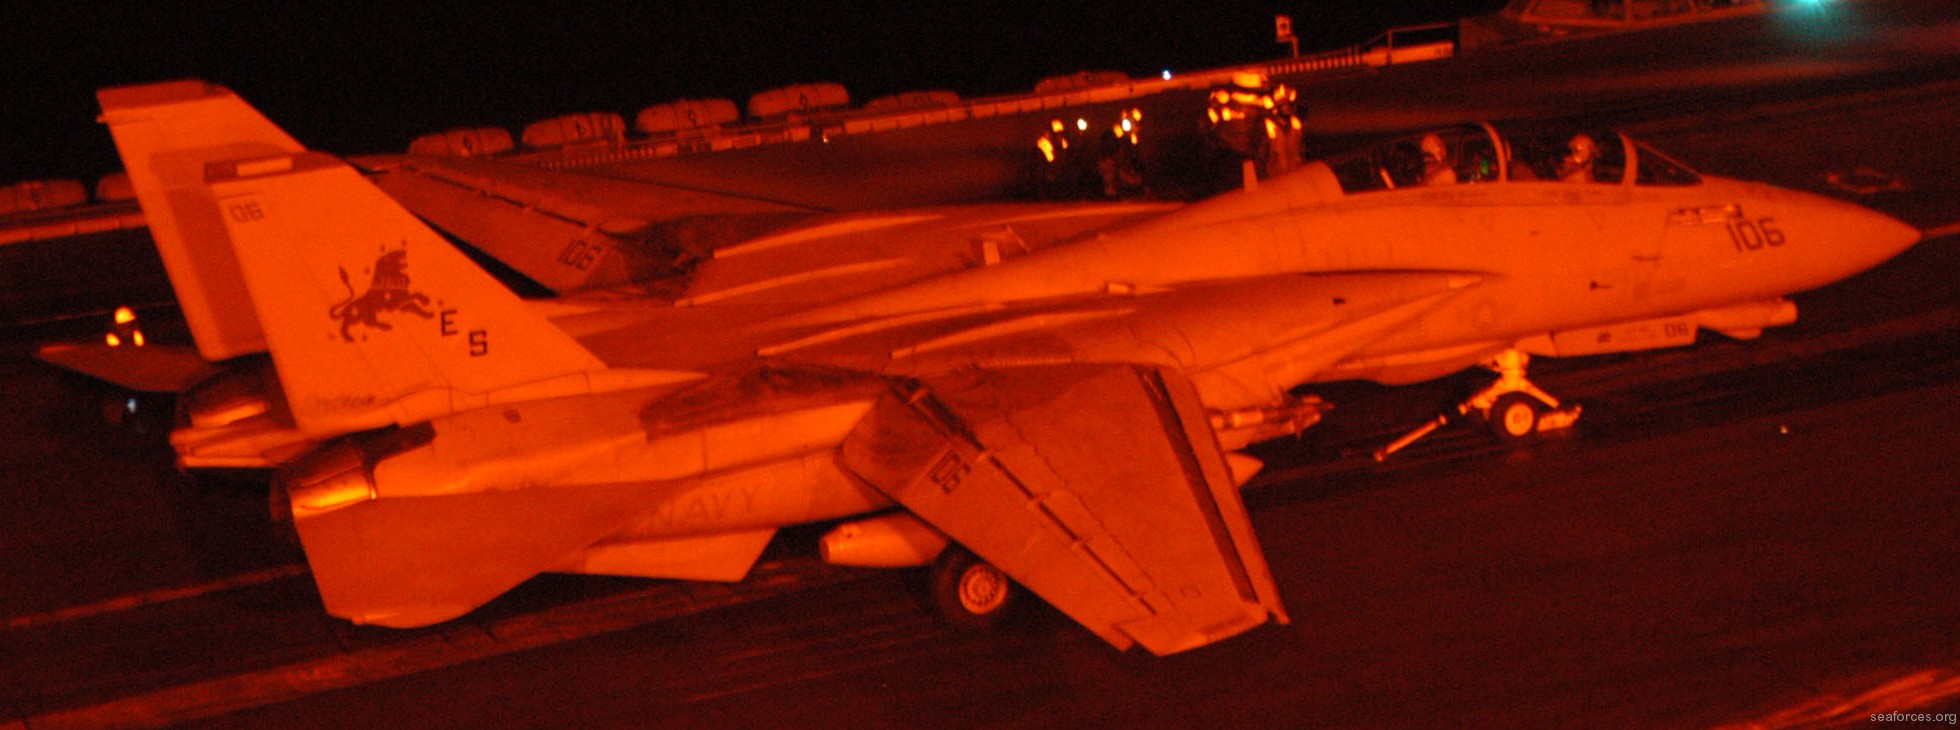 vf-213 black lions fighter squadron us navy f-14d tomcat carrier air wing cvw-8 uss theodore roosevelt cvn-71 50